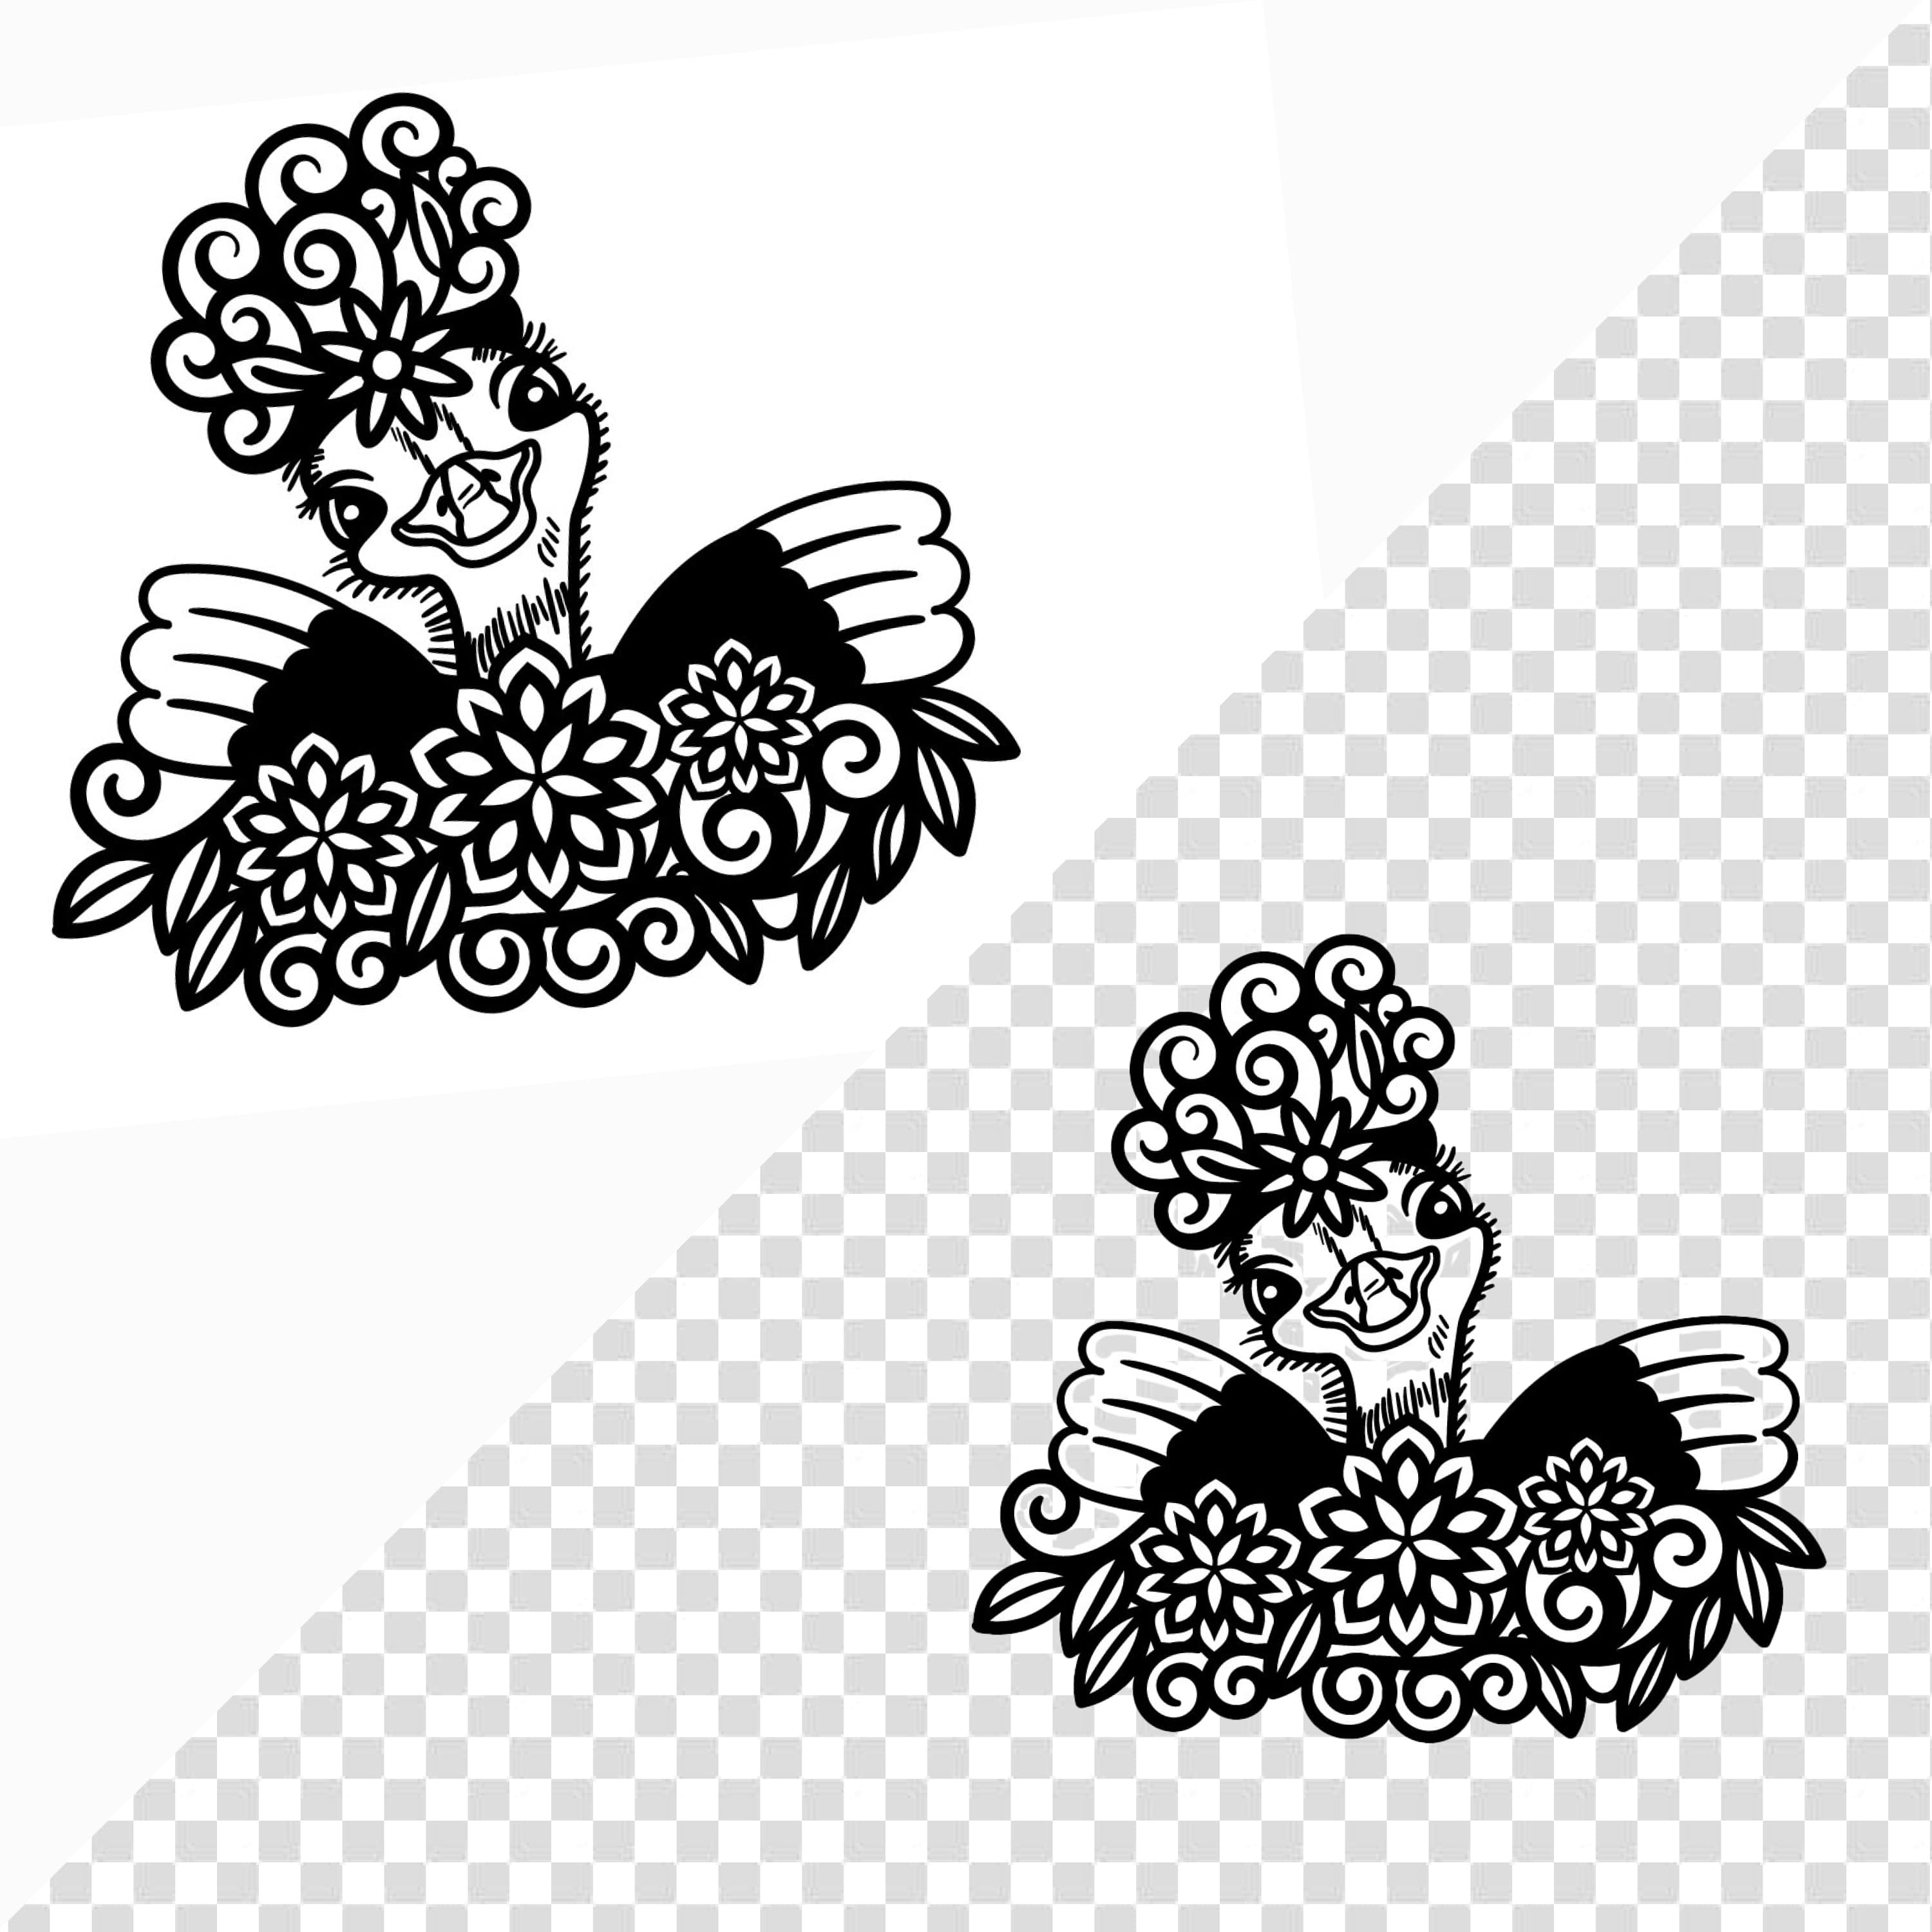 Silly Ostrich with Flowers Decoration SVG cover.